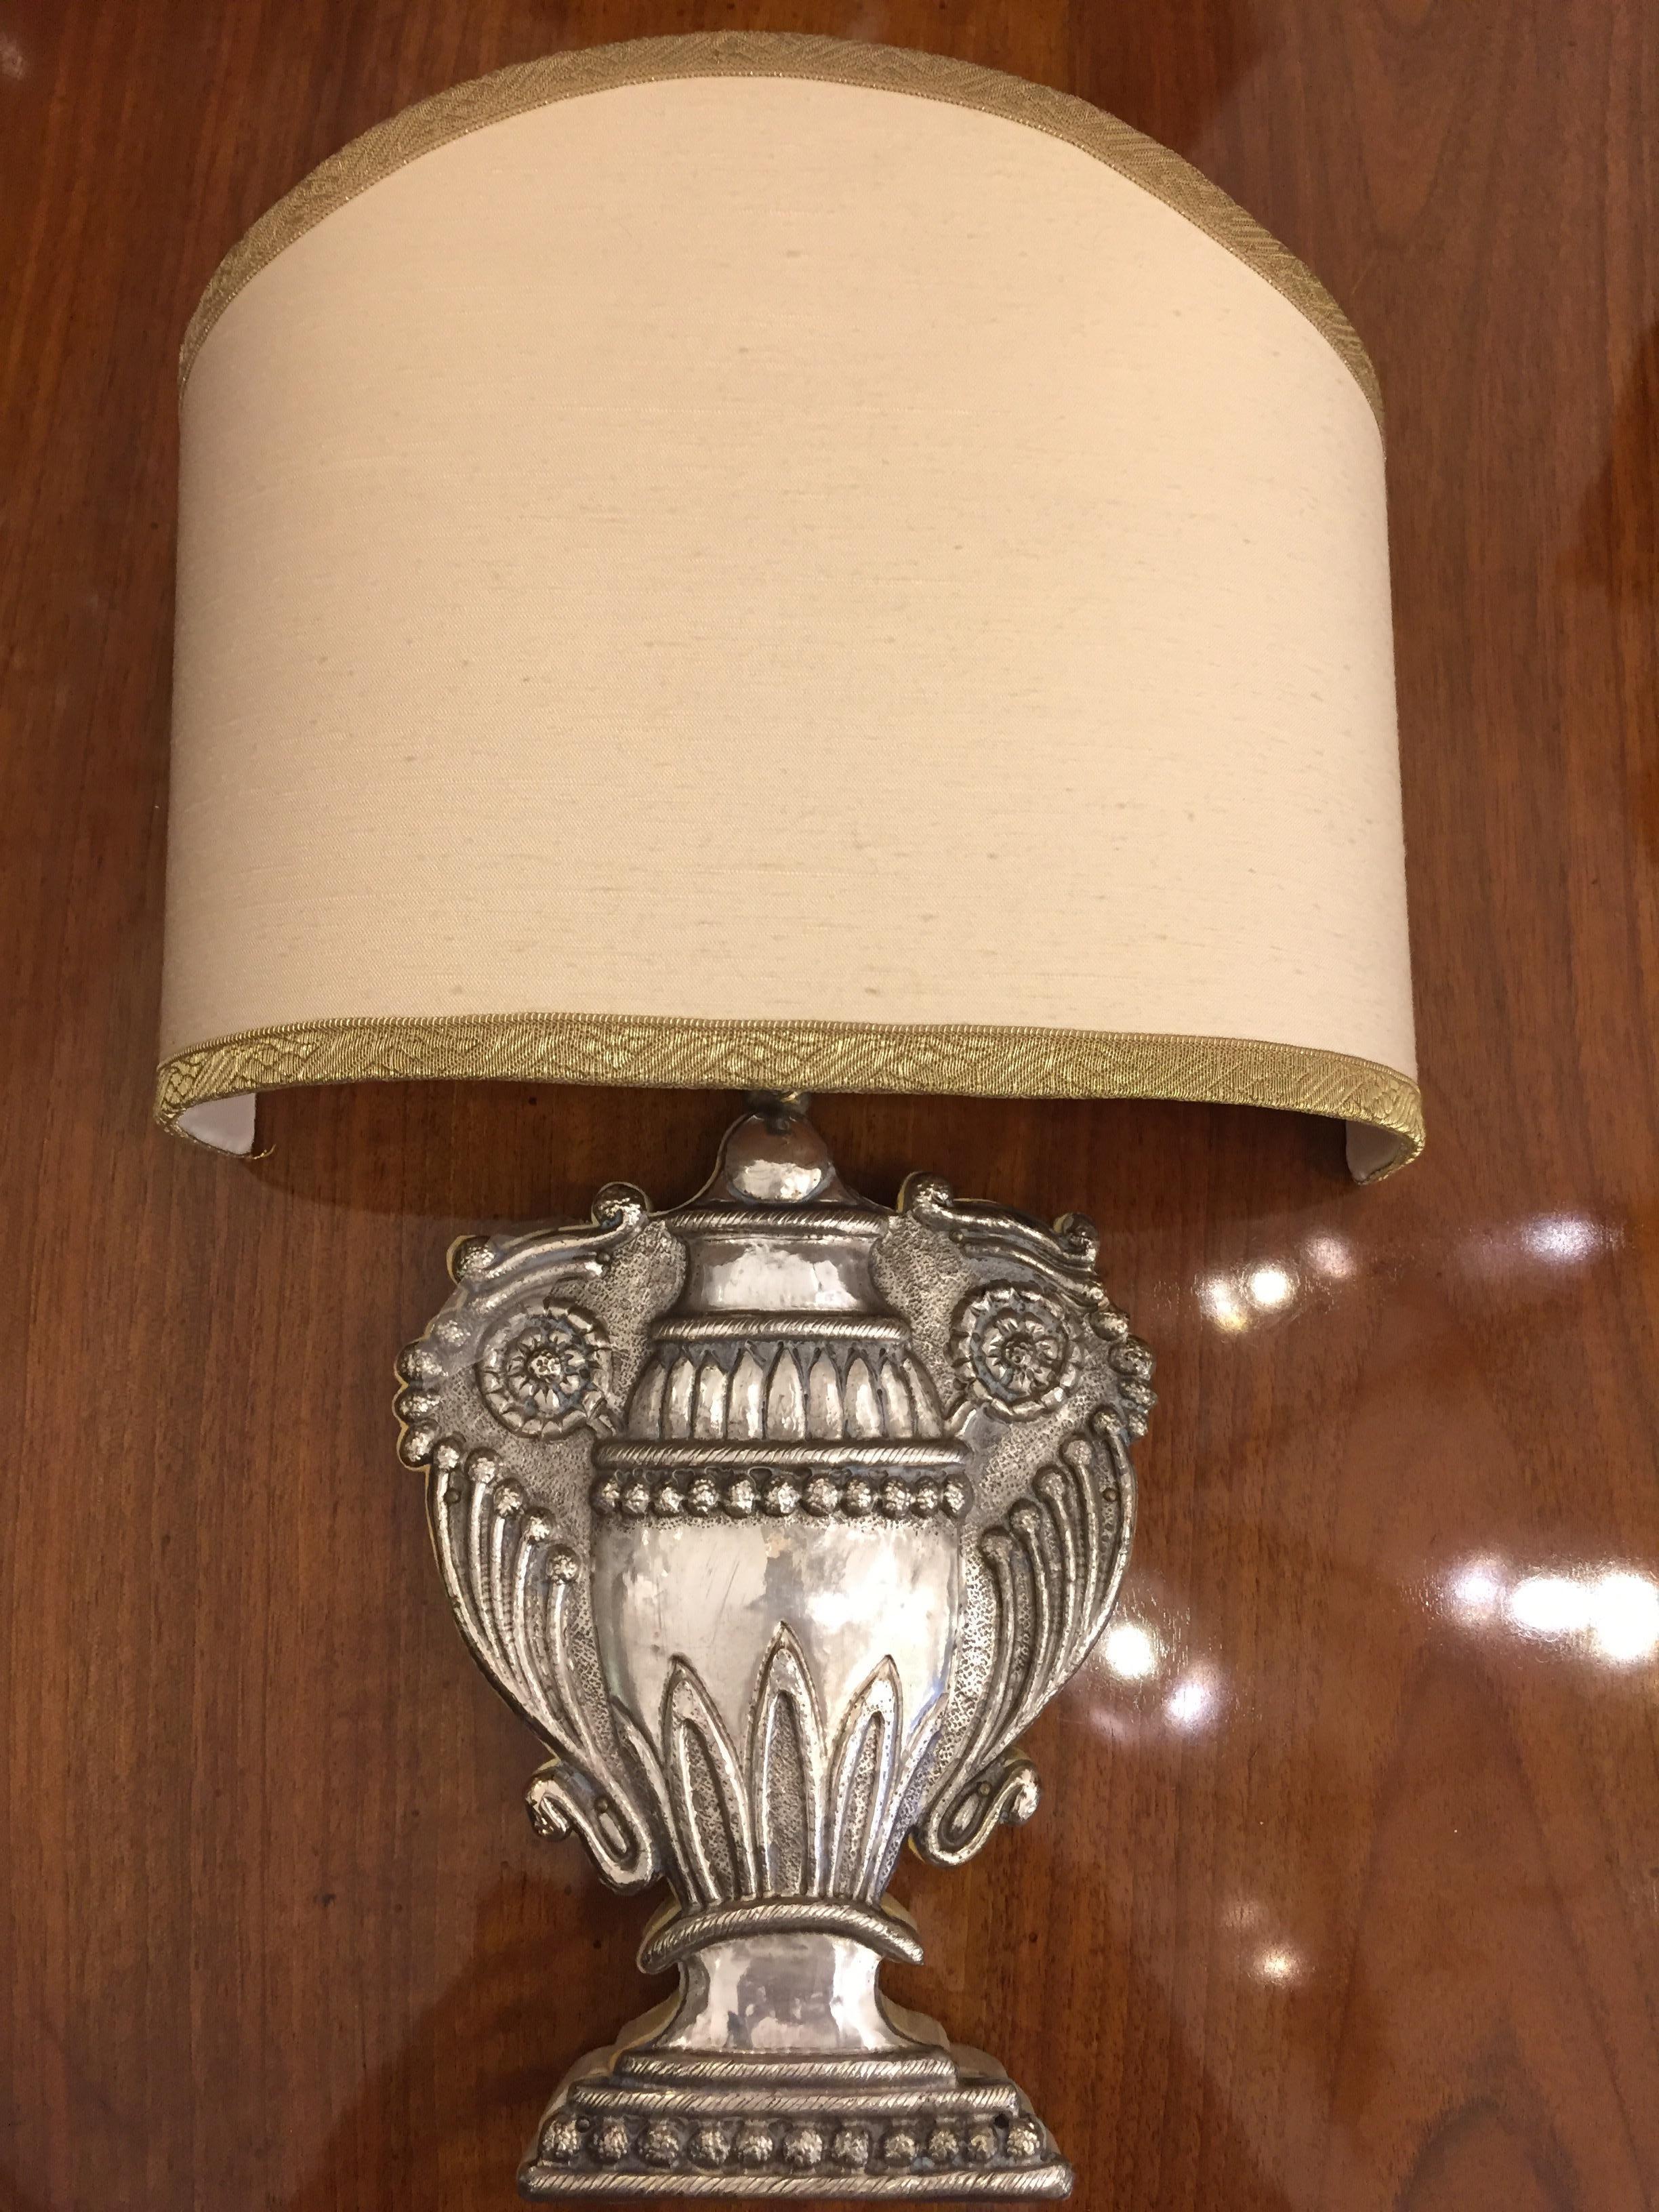 Italian Repoussé Silvered Sconce Urn Vase Wall-Light 20th Century Baroque Style For Sale 10